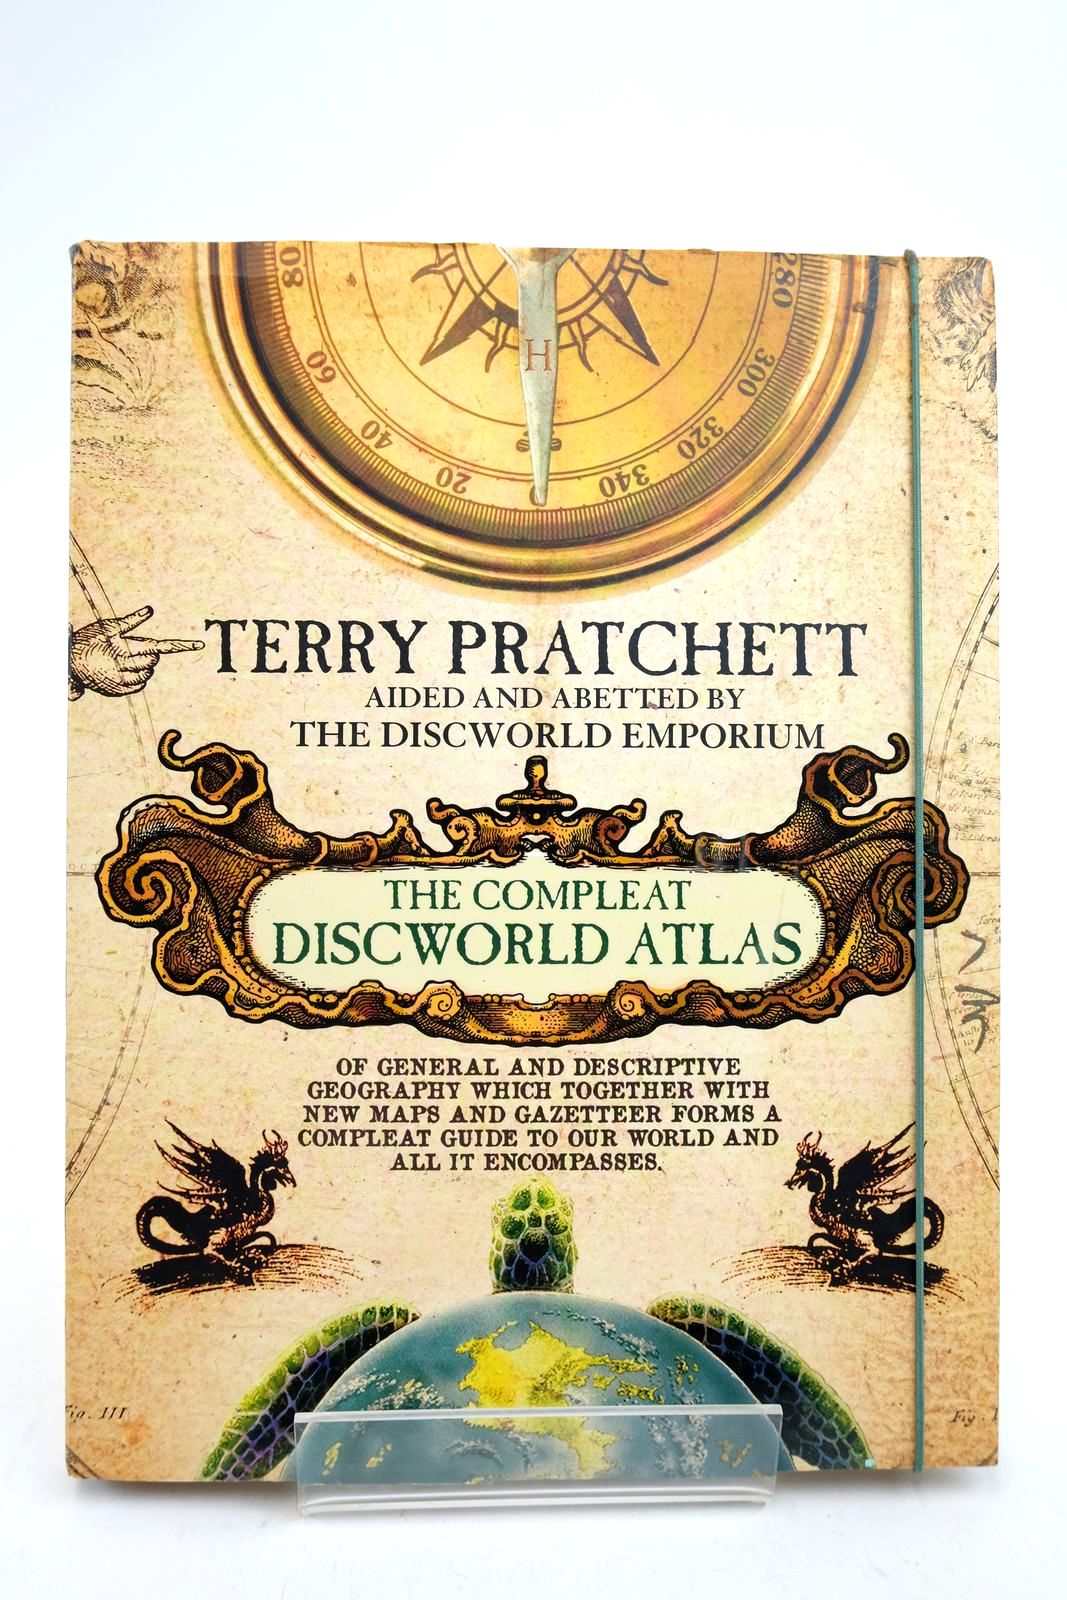 Photo of THE COMPLEAT DISCWORLD ATLAS written by Pratchett, Terry published by Doubleday (STOCK CODE: 2140718)  for sale by Stella & Rose's Books